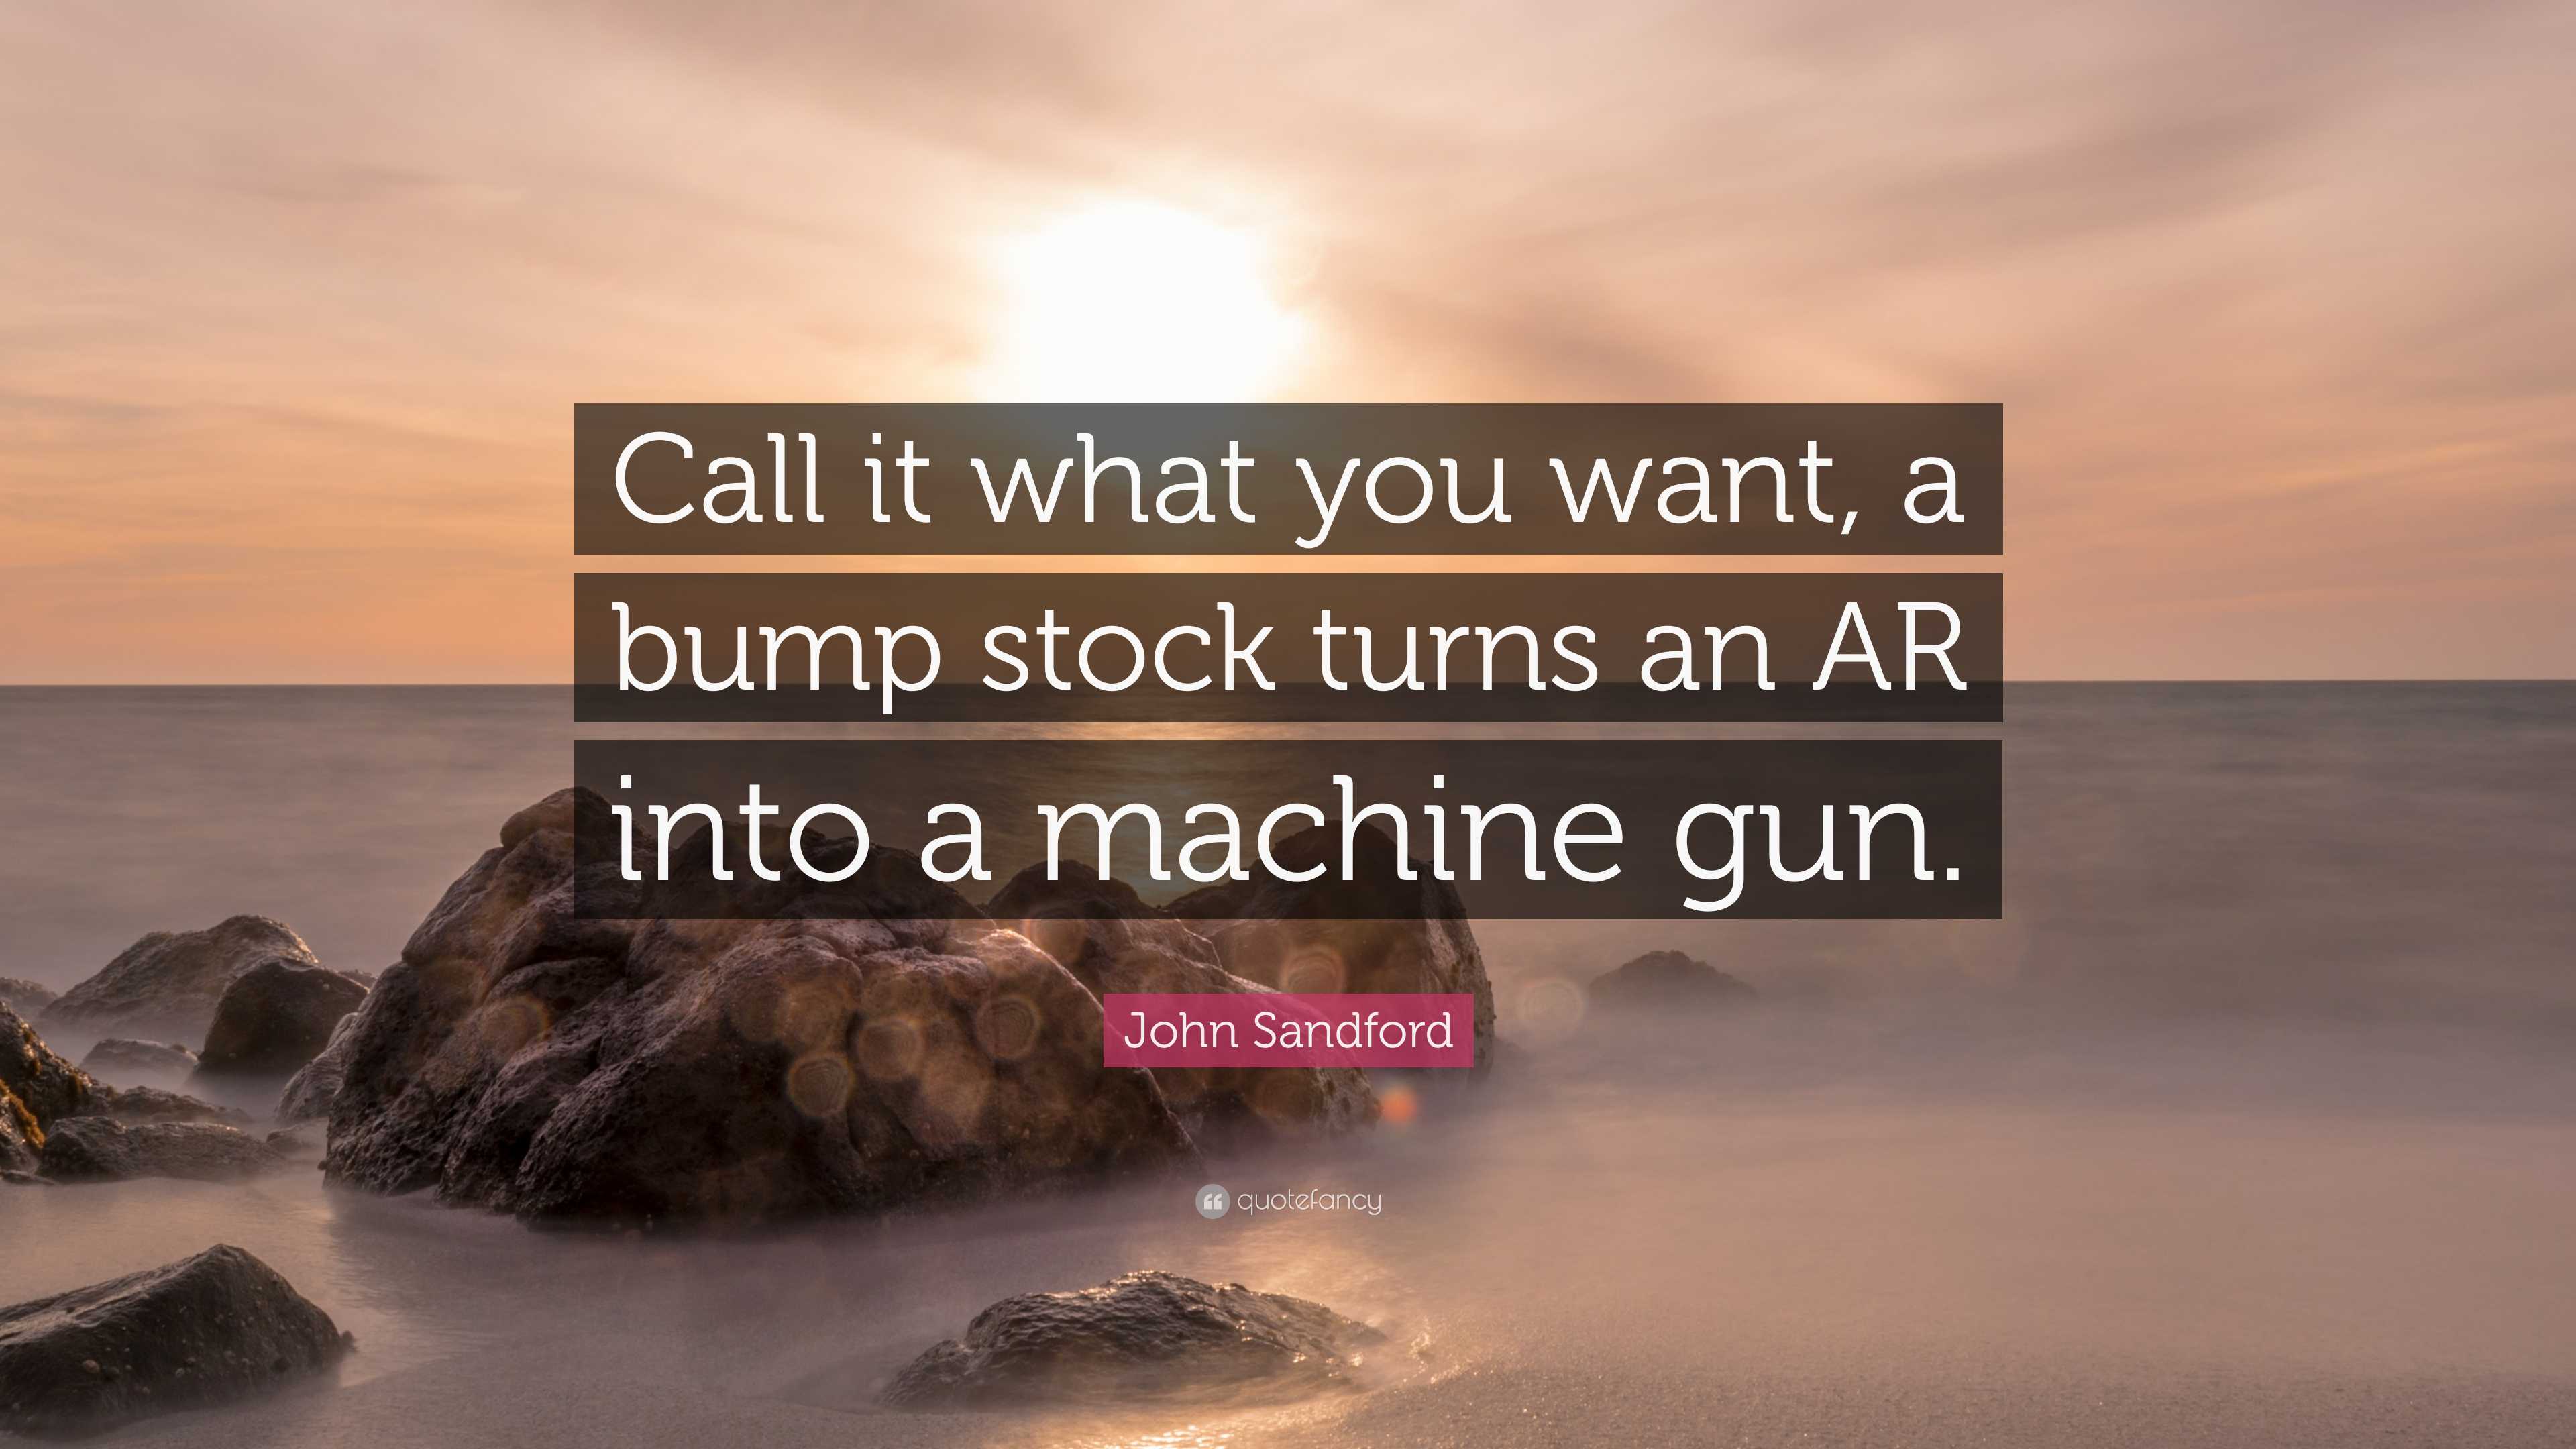 John Sandford Quote: “Call it what you want, a bump stock turns an AR into a